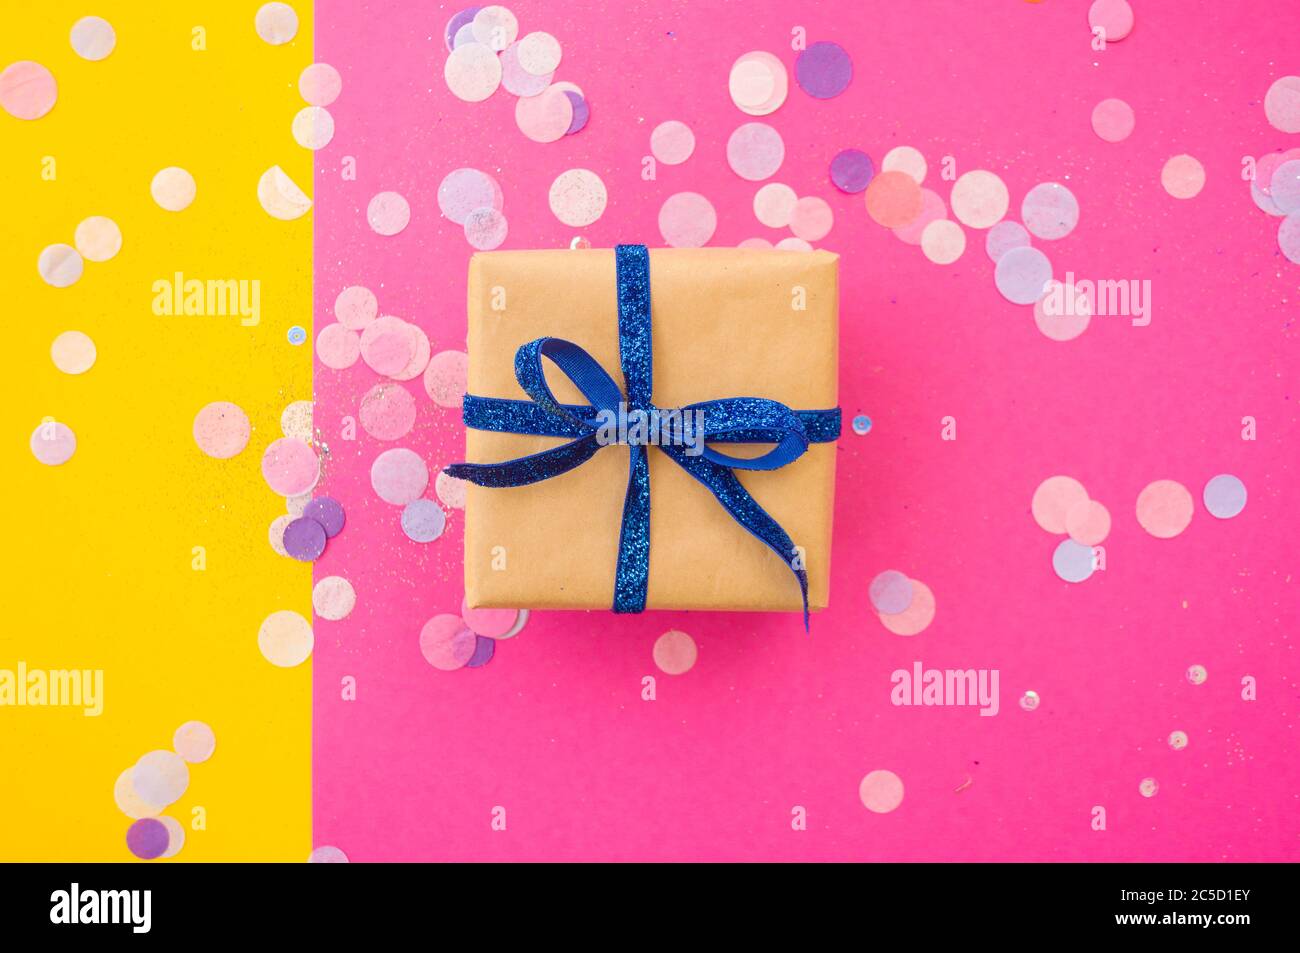 Giftbox tied with blue color ribbon on bright pink, pastel yellow background with colorful confetti and glitter. Festive background. Stock Photo